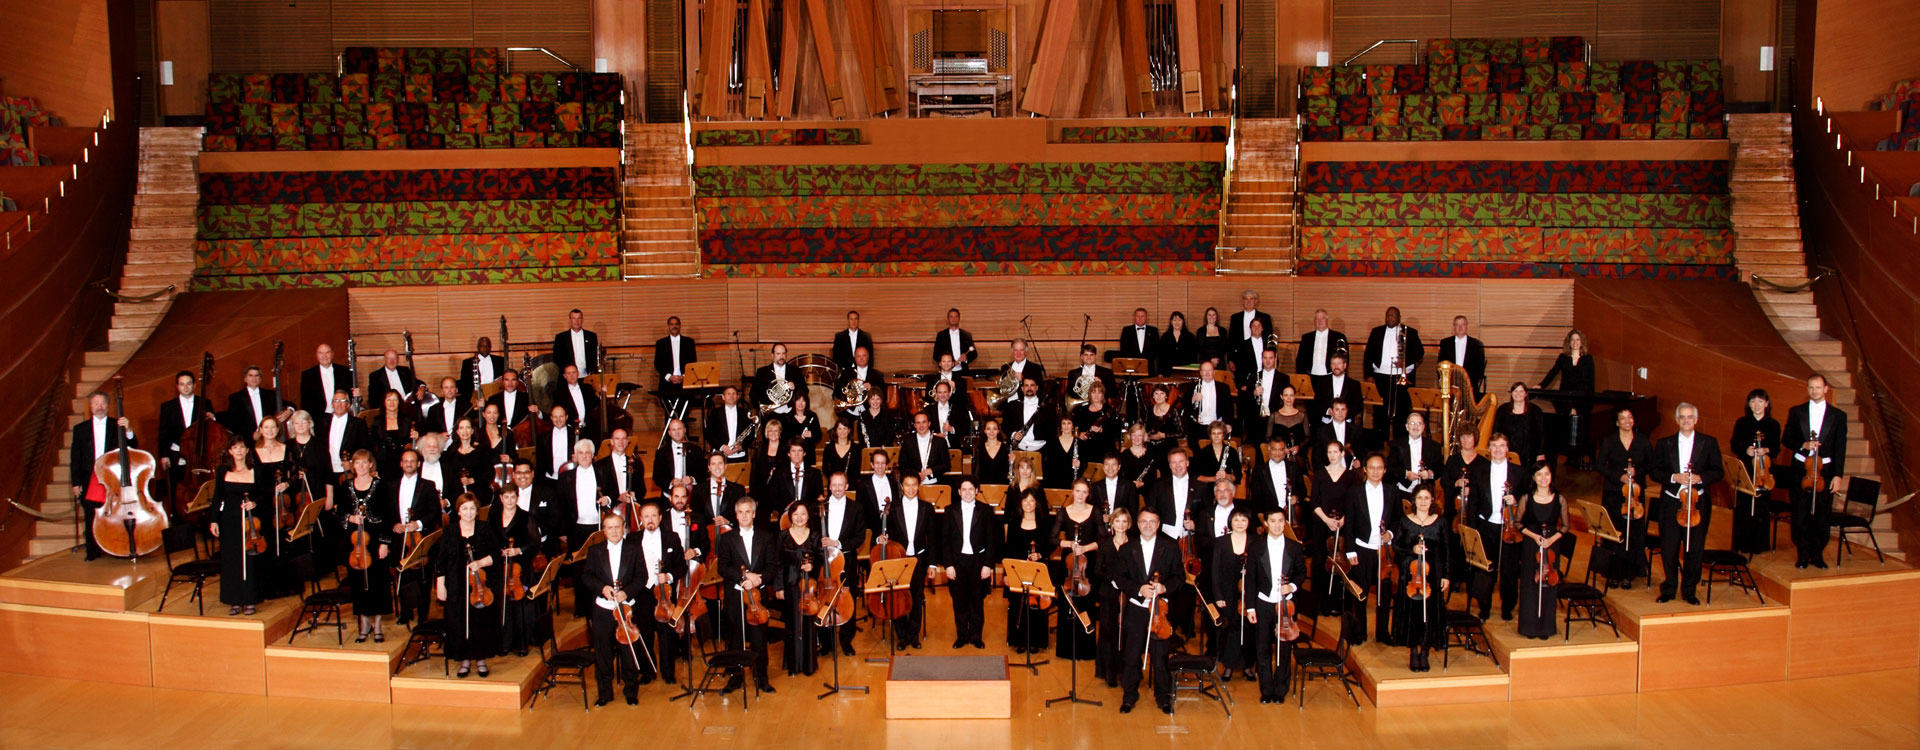 The Los Angeles Philharmonic - The Tradition of the New